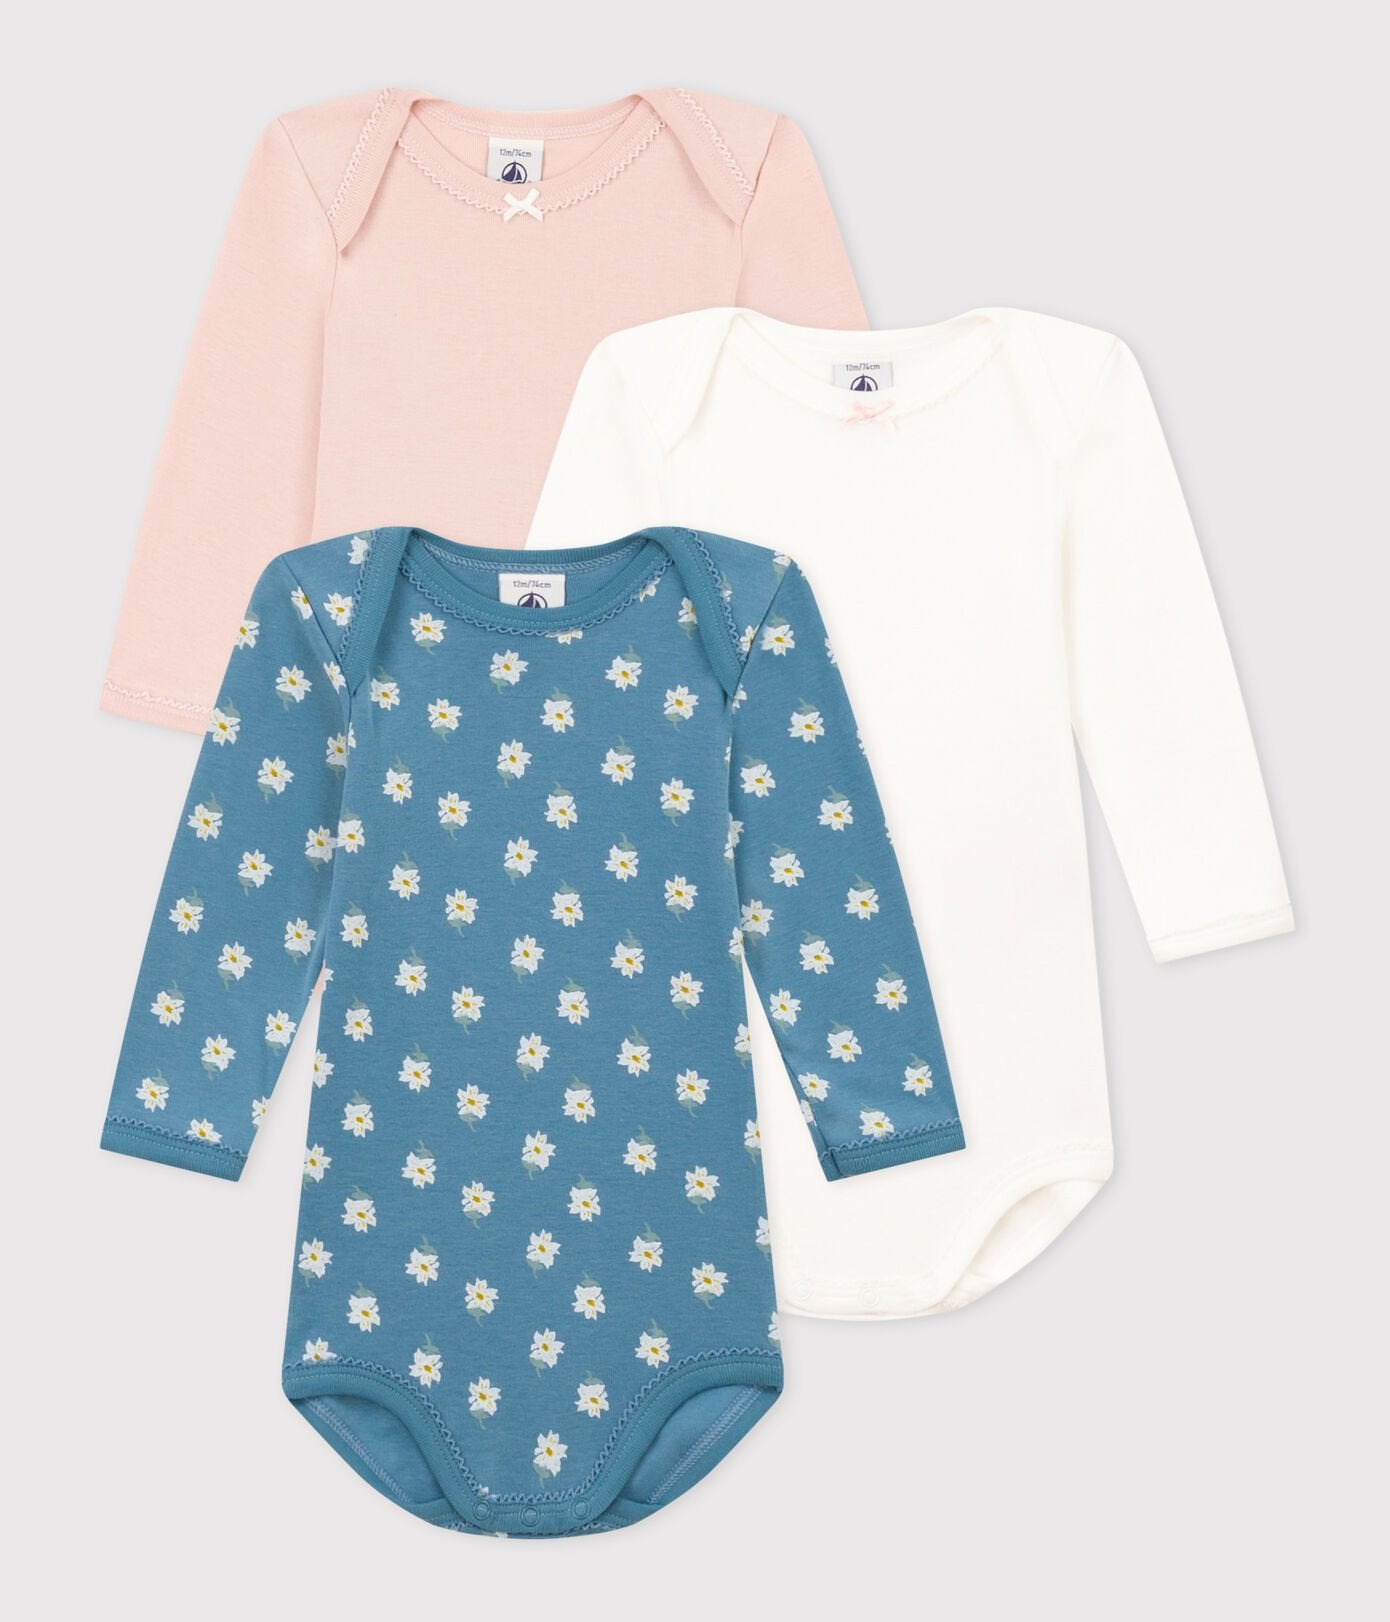 Pack of 3 Long Sleeve Bodysuits by Petit Bateau - set white, Baby